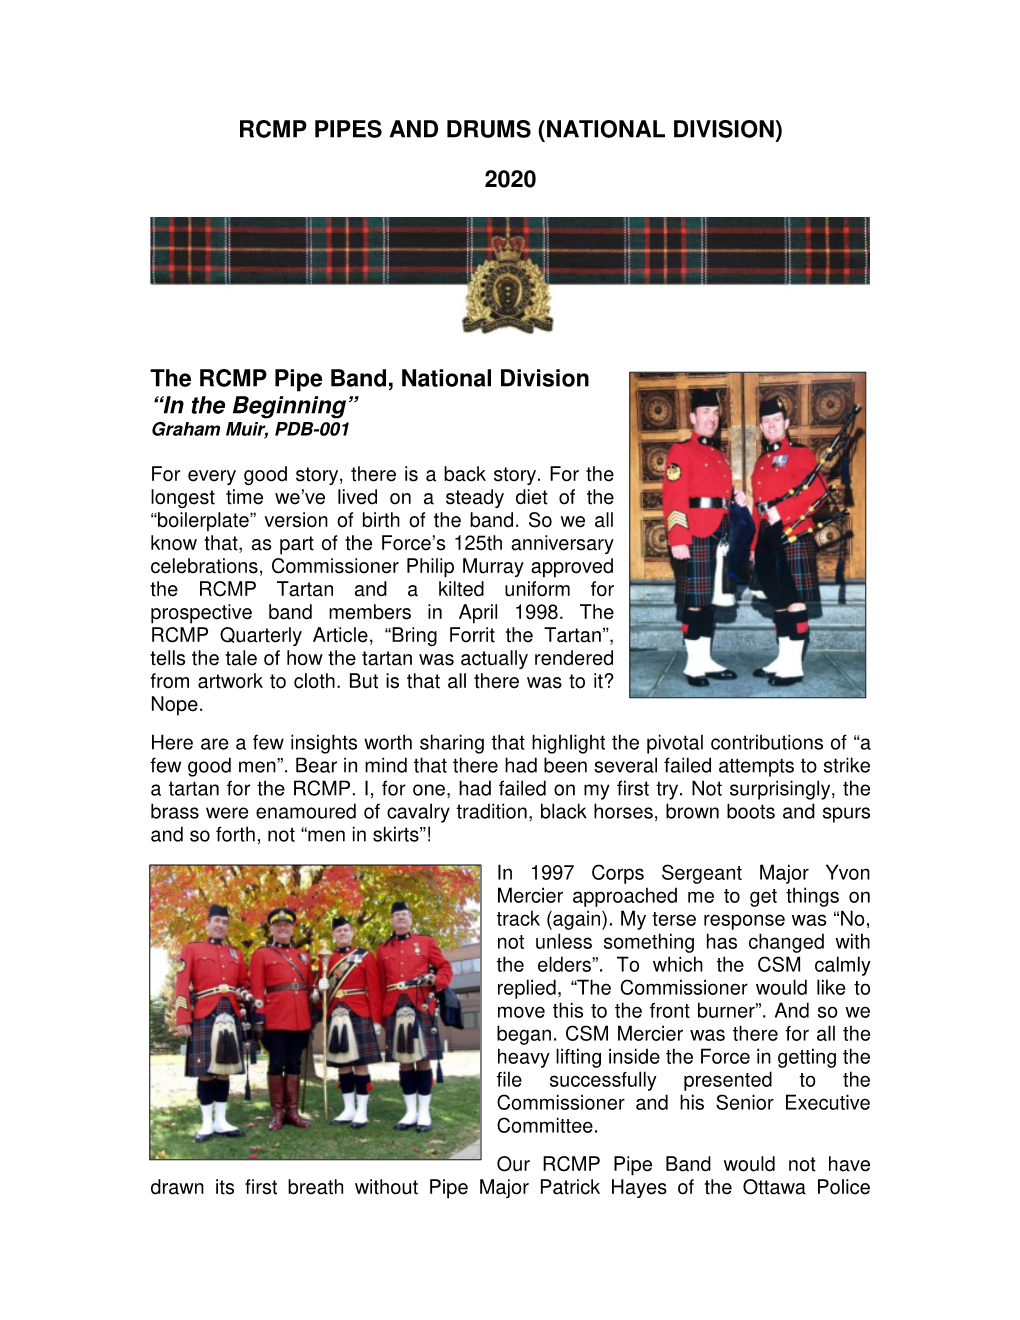 2020 the RCMP Pipe Band, National Division “In the Beginning”